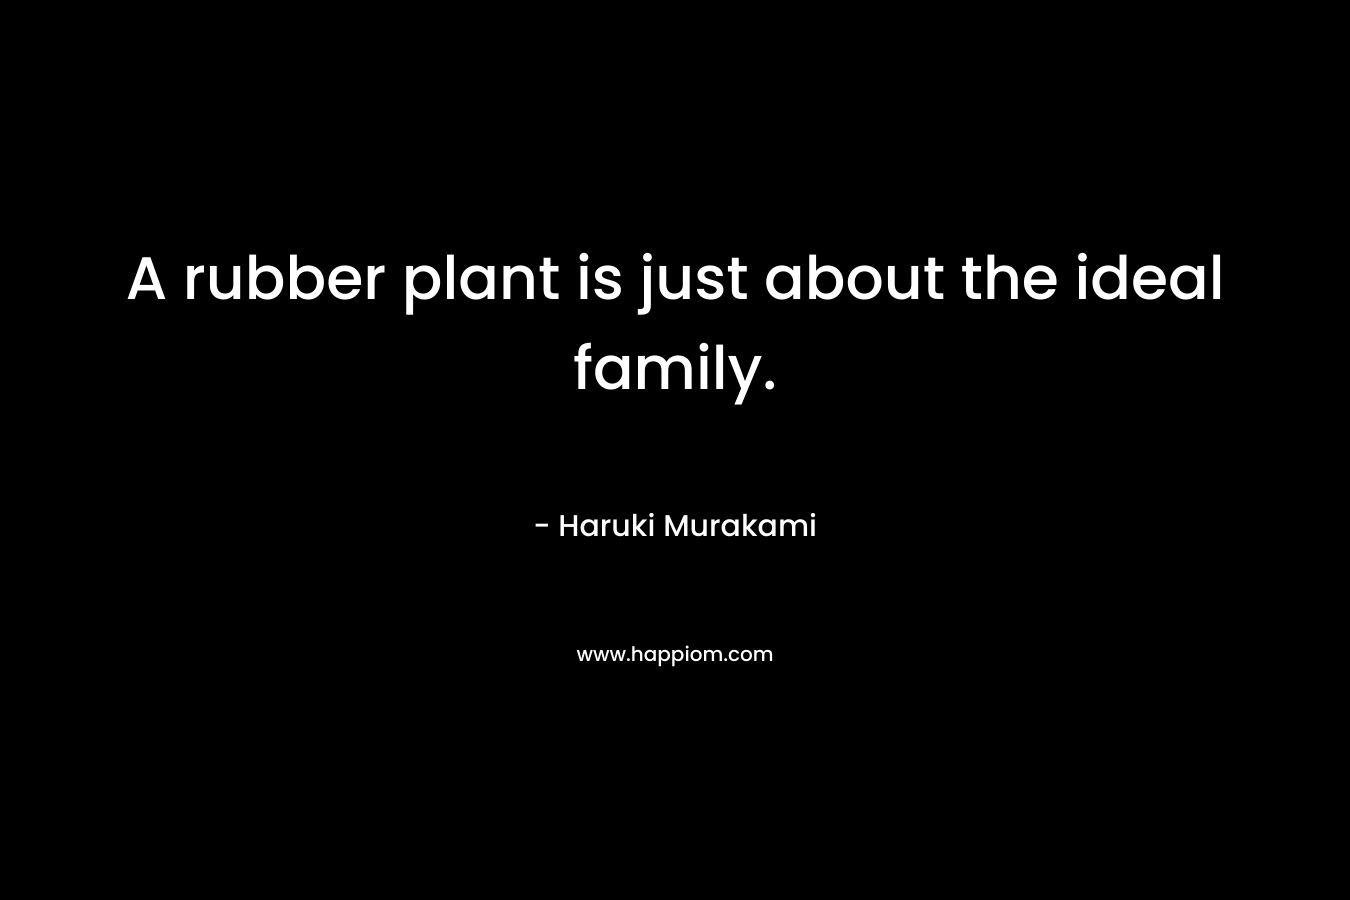 A rubber plant is just about the ideal family.